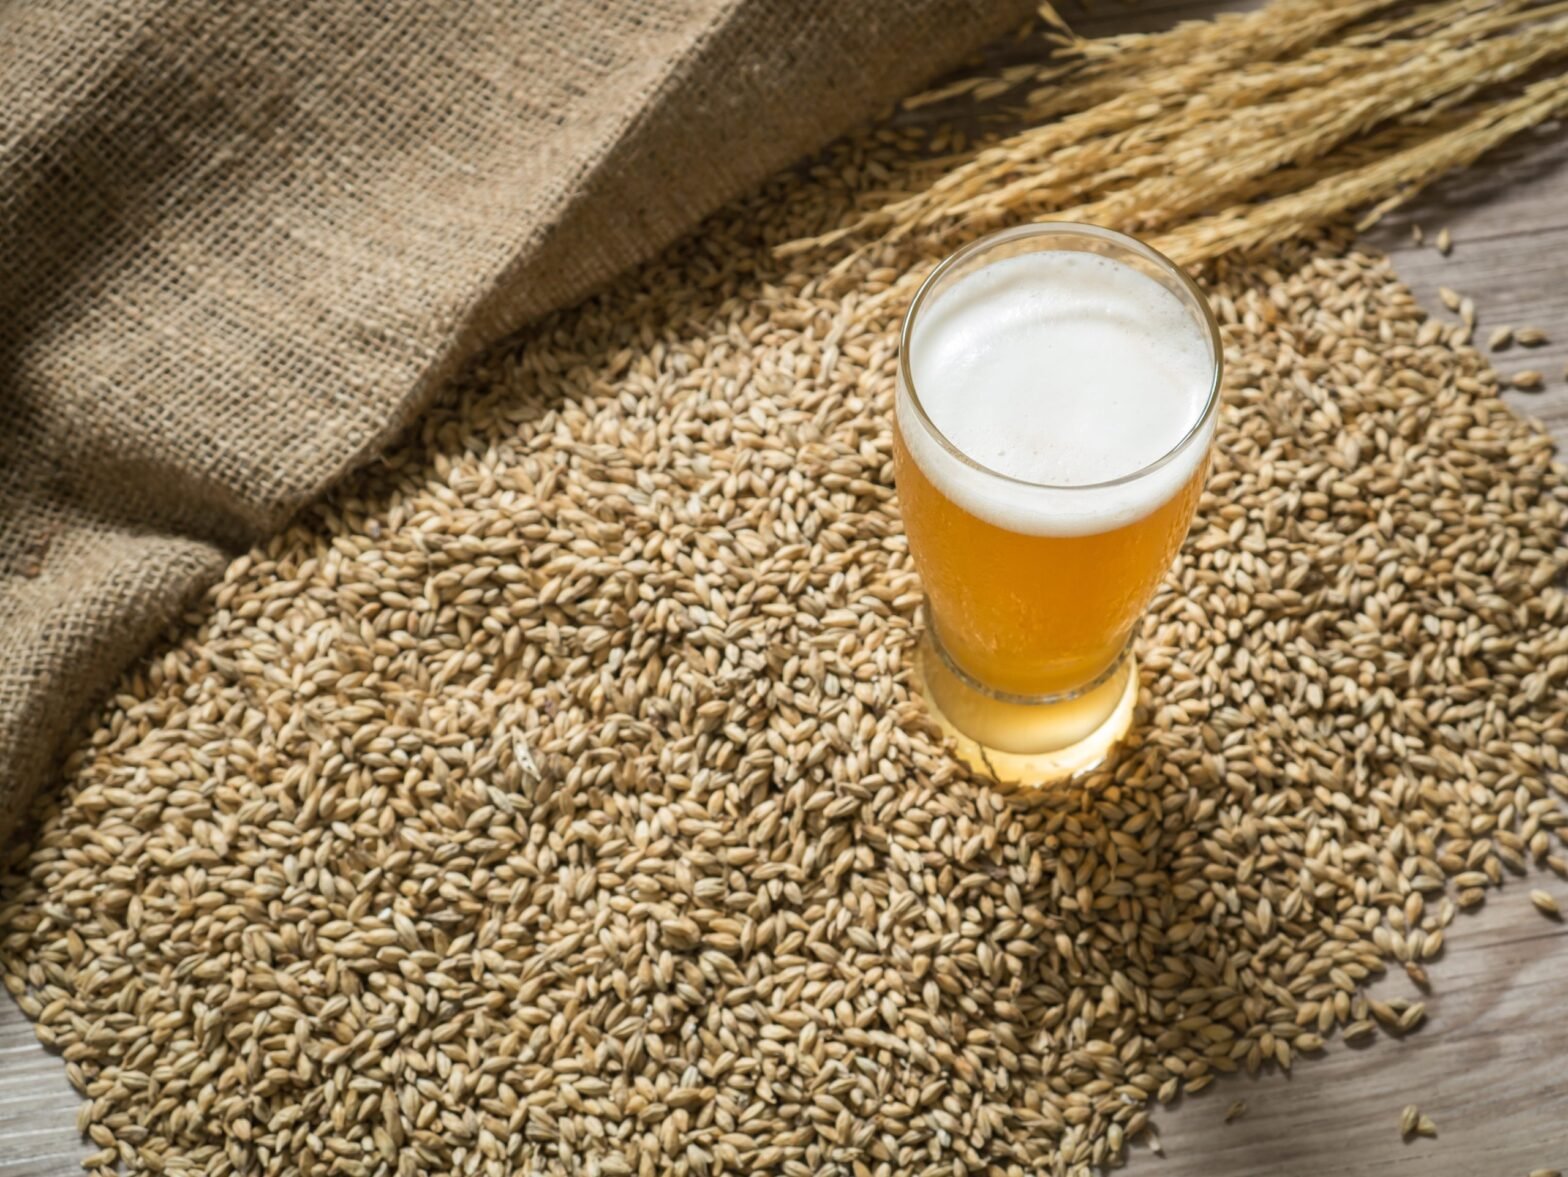 Beer could exert 'greater effects than probiotics’ say scientists